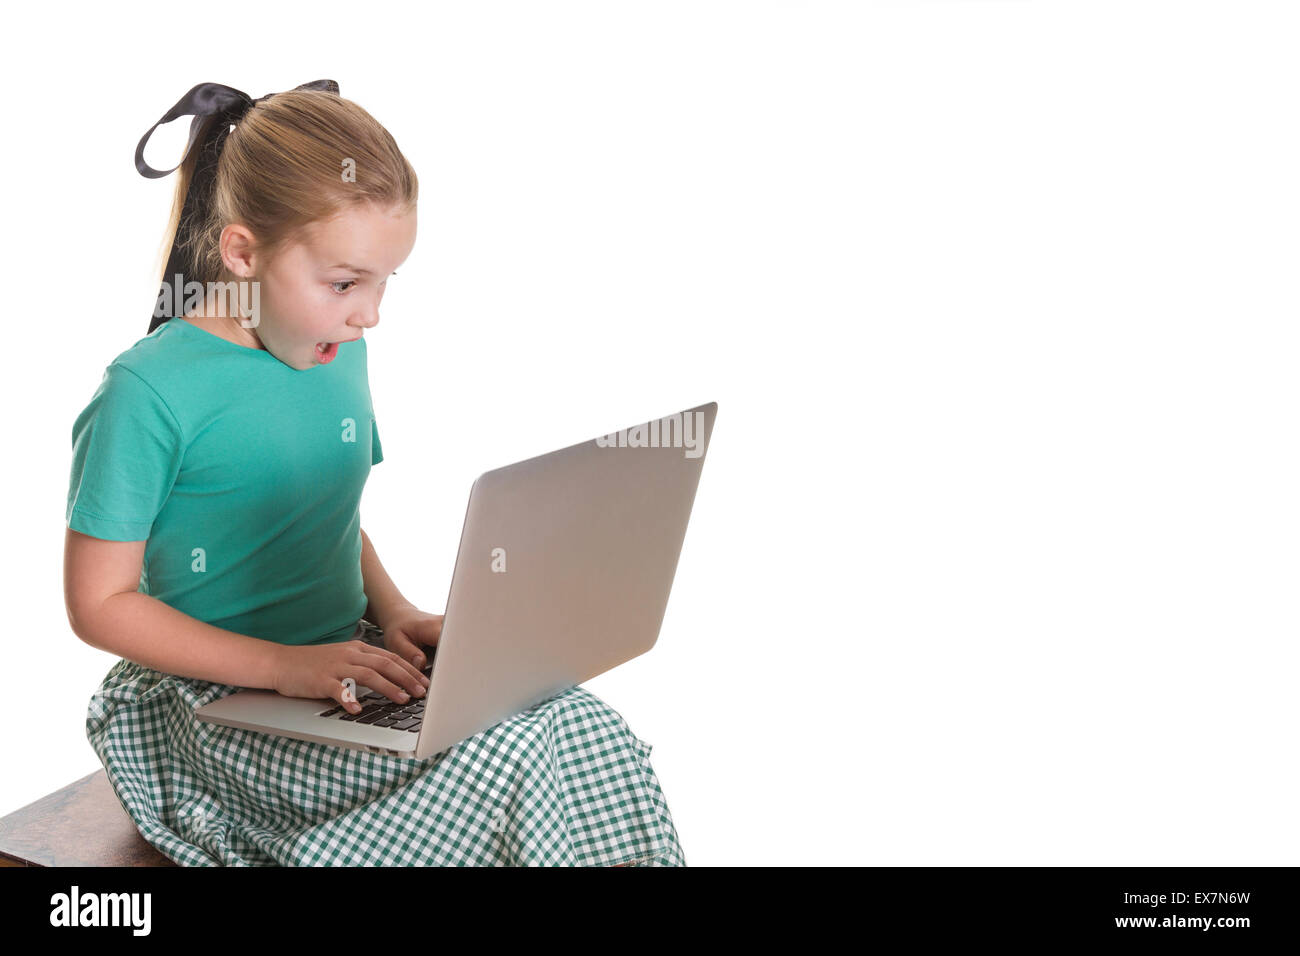 Young girl with a computer on her lap, looking shocked and amazed. Stock Photo